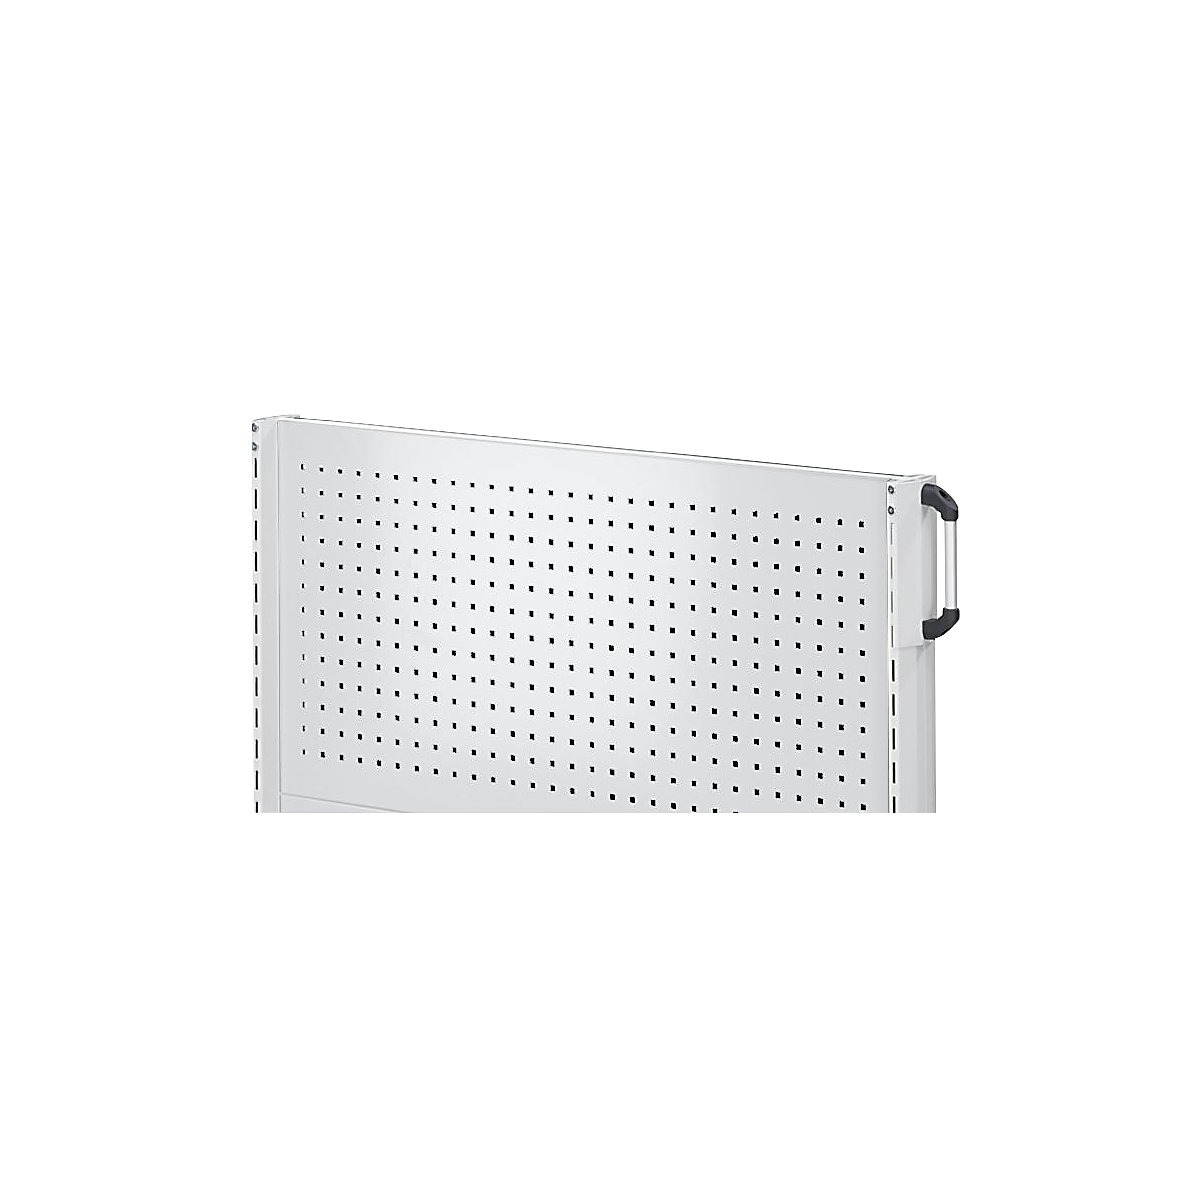 Perforated panel – ANKE, width 600 mm, length 1250 mm, grey-3